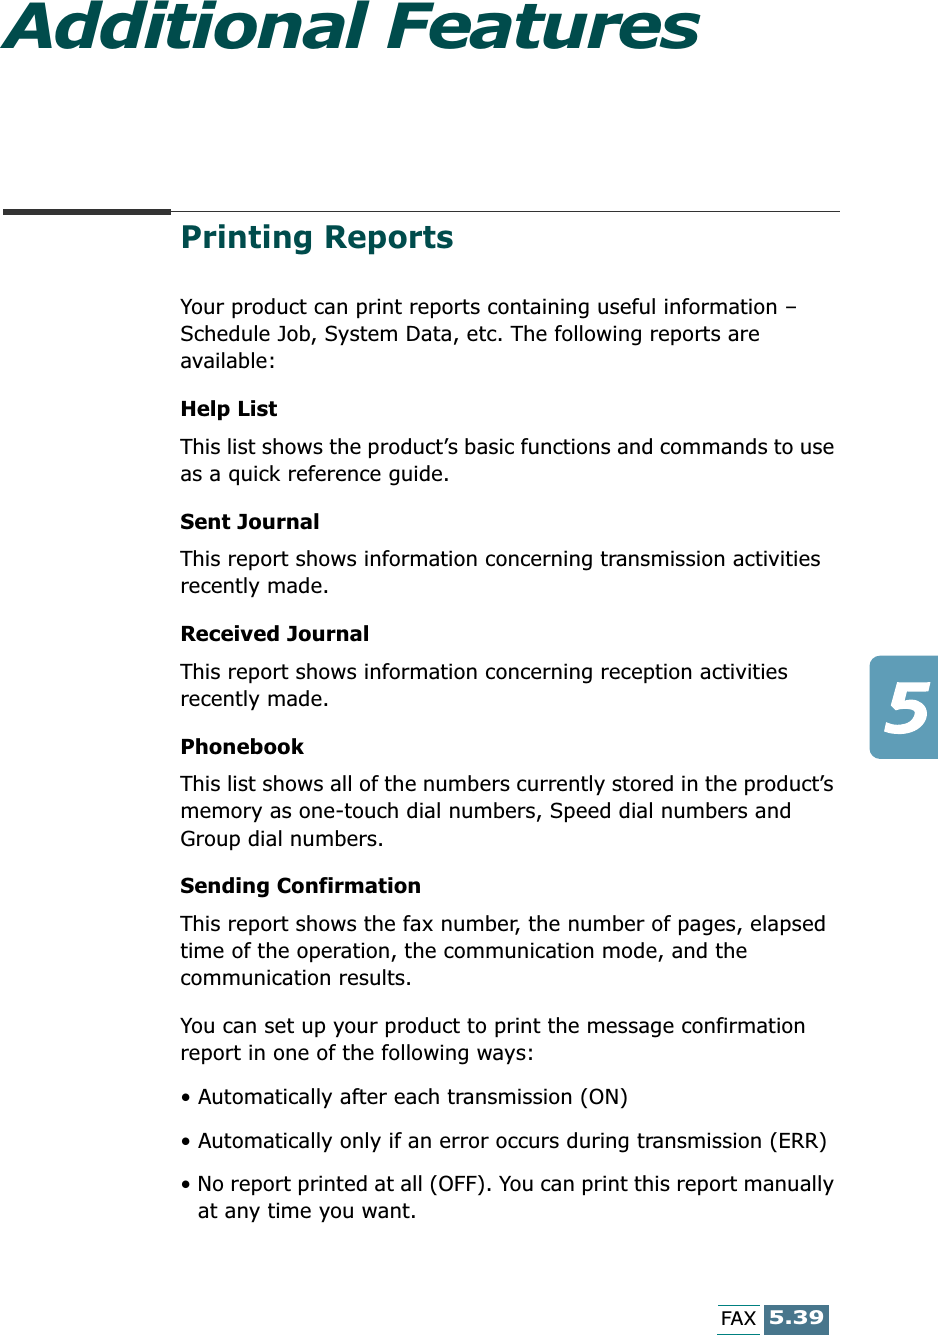 5.39FAXAdditional FeaturesPrinting ReportsYour product can print reports containing useful information – Schedule Job, System Data, etc. The following reports are available: Help ListThis list shows the product’s basic functions and commands to use as a quick reference guide. Sent JournalThis report shows information concerning transmission activities recently made. Received JournalThis report shows information concerning reception activities recently made. PhonebookThis list shows all of the numbers currently stored in the product’s memory as one-touch dial numbers, Speed dial numbers and Group dial numbers. Sending ConfirmationThis report shows the fax number, the number of pages, elapsed time of the operation, the communication mode, and the communication results.You can set up your product to print the message confirmation report in one of the following ways: • Automatically after each transmission (ON)• Automatically only if an error occurs during transmission (ERR)• No report printed at all (OFF). You can print this report manually at any time you want.